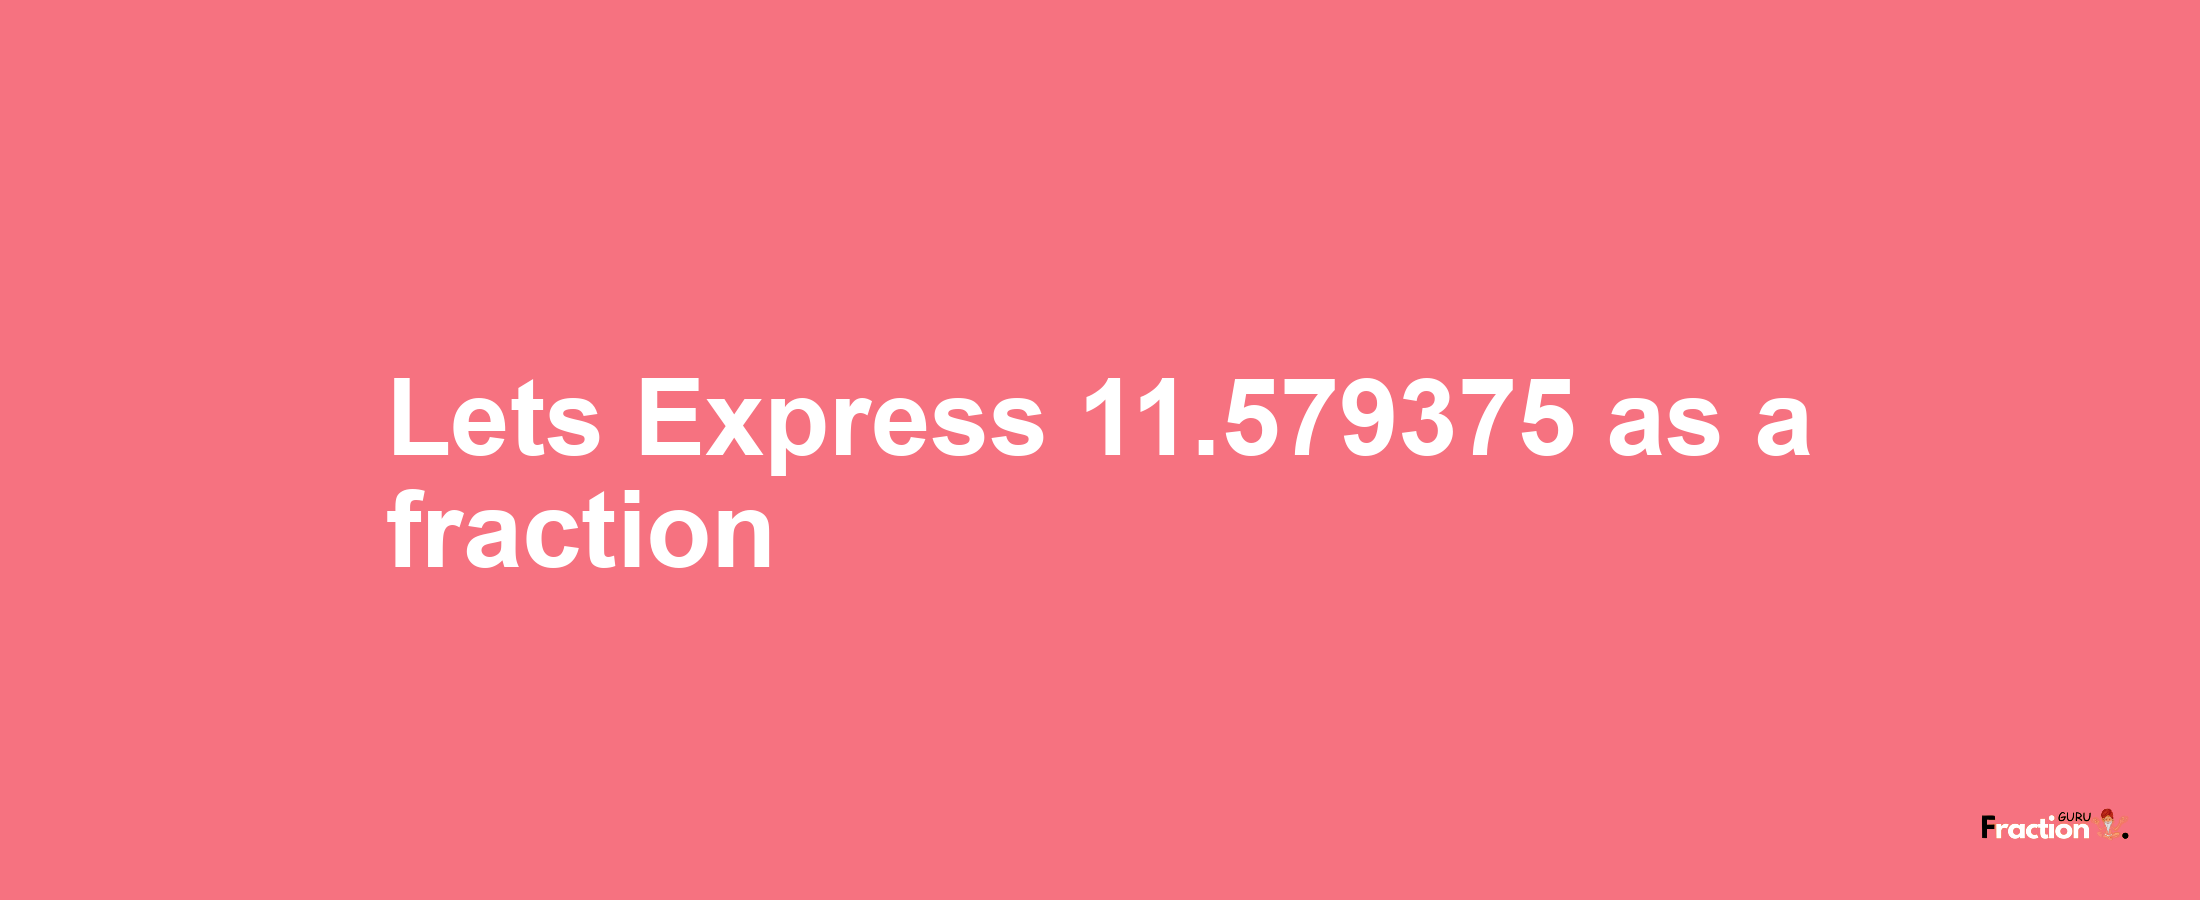 Lets Express 11.579375 as afraction